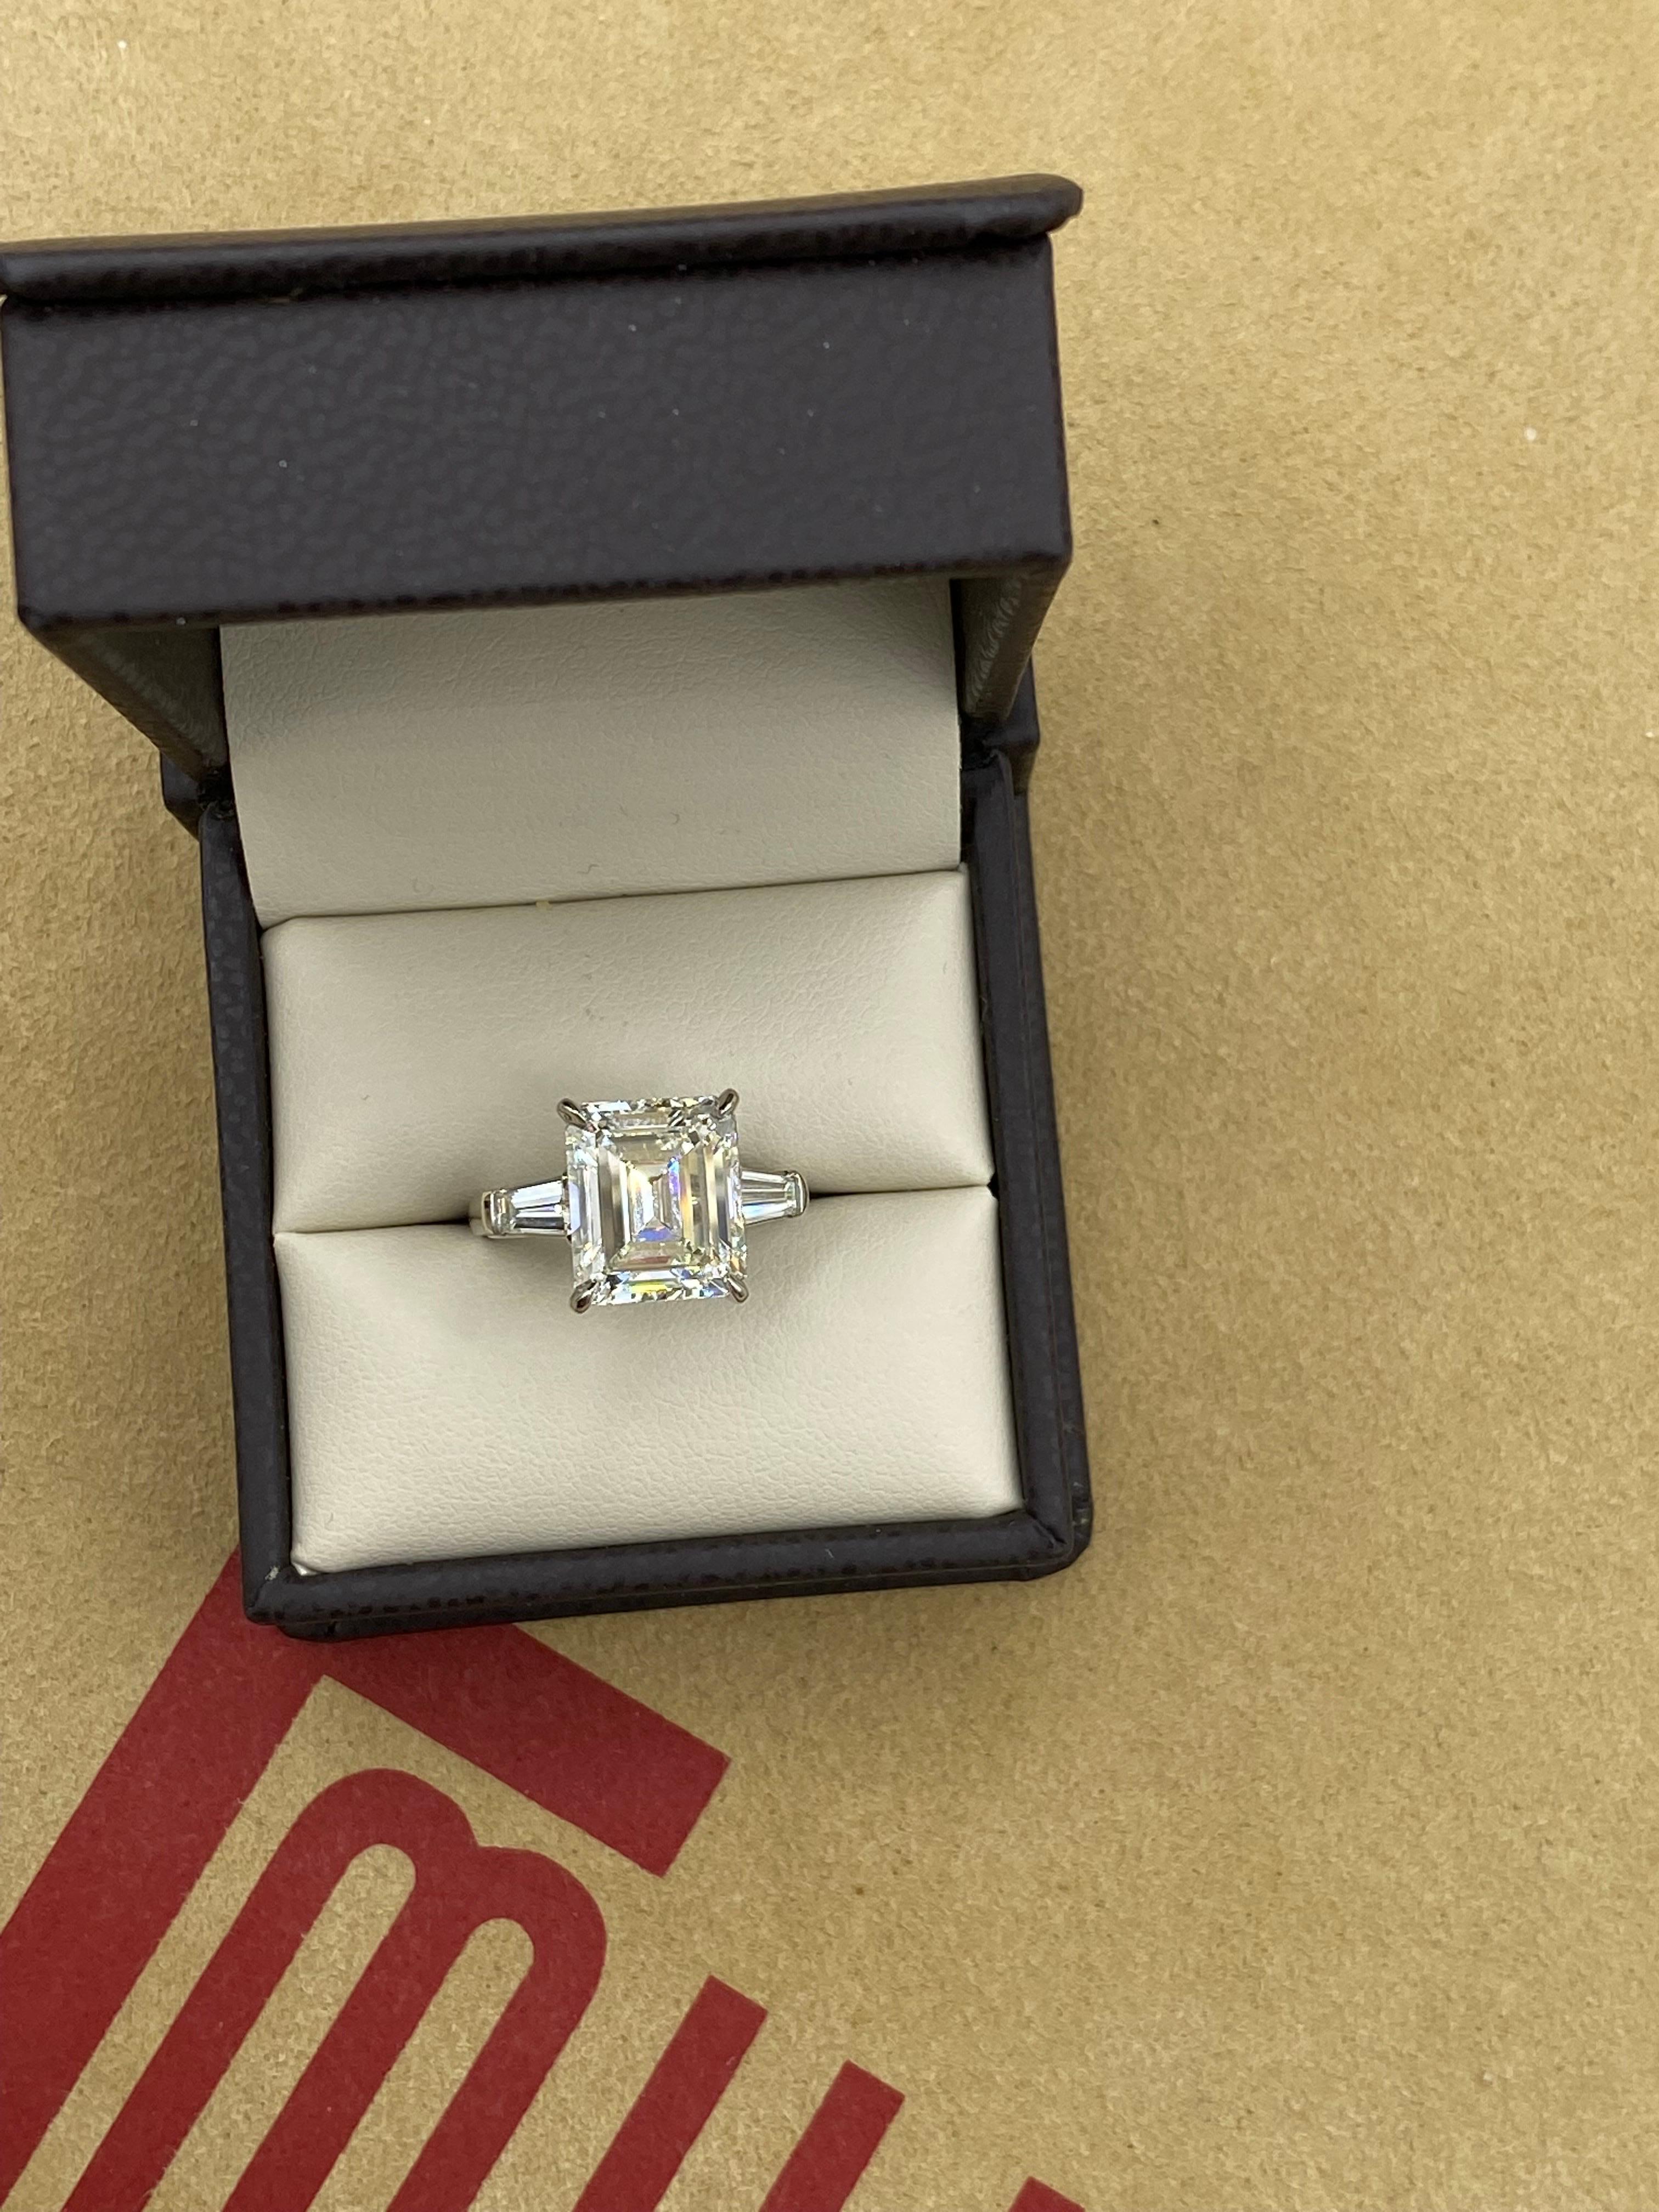 Emilio Jewelry Gia Certified 7.75 Carat Emerald Cut Diamond Ring In New Condition For Sale In New York, NY